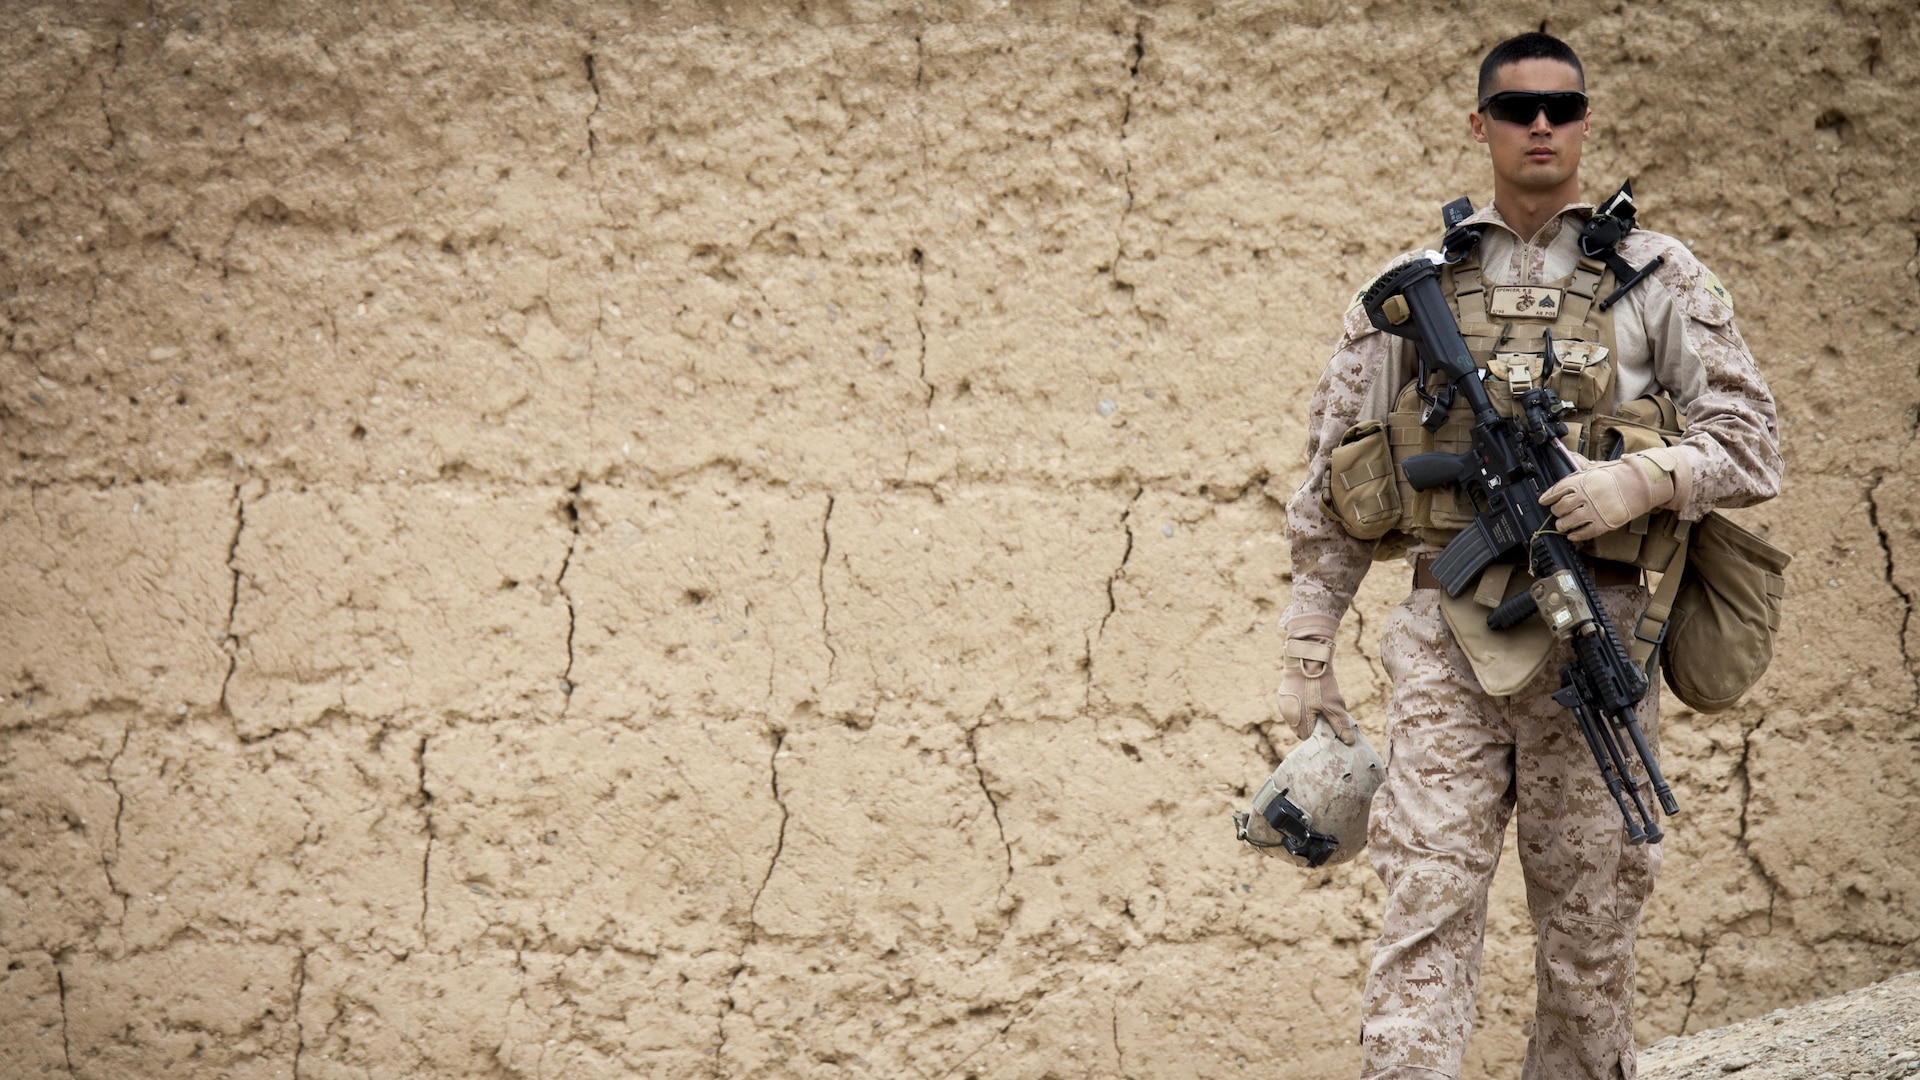 U.S. Marine Cpl. Raymond Spencer a team leader with 3rd Battalion, 4th Marine Regiment, Regimental Combat Team 7, prepares to depart the Afghan Uniform Police station during Operation Eagle in Delaram city, Helmand province, Afghanistan, April 8, 2013. Spencer was part of the security force detail for the 4th Brigade, 215th Corps Brigade Advisor Team that was conducting Operation Eagle, an Afghan-led clearing operation. 